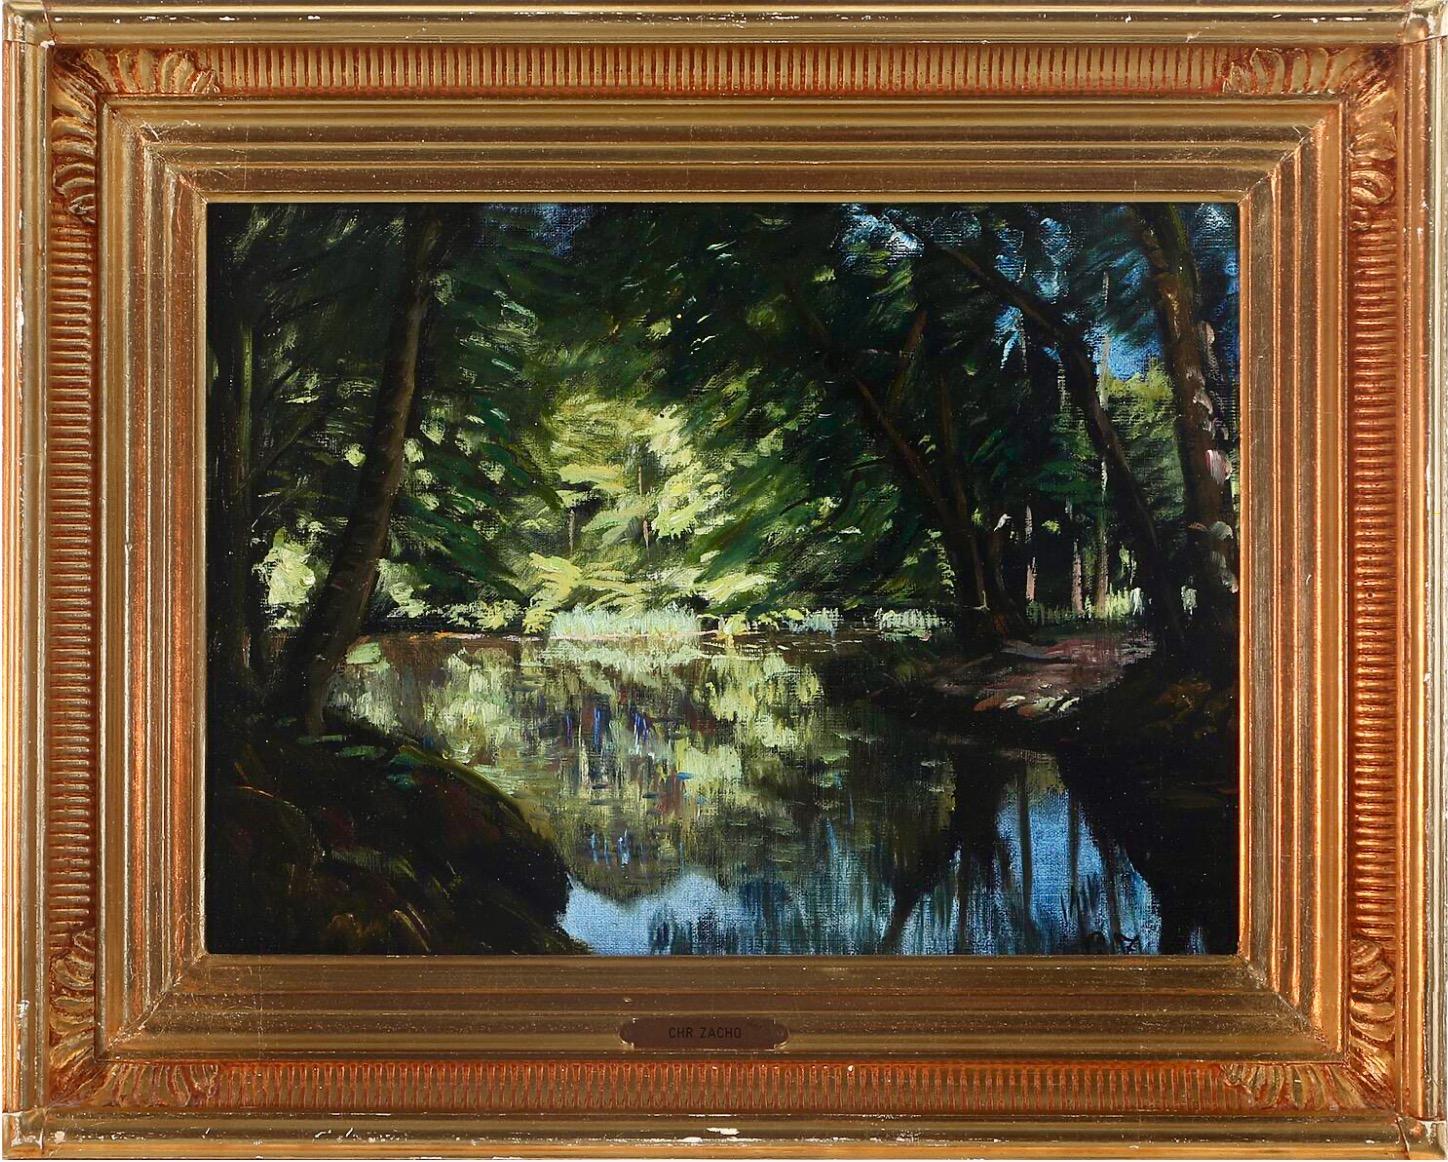 A still standing stream with shading trees and a sunlit opening over the water painted by Peter Mørch Christian Zacho (1843 - 1913). Oil on canvas laid on board. Signed C.Z. Probably painted in the late 19th century.
Zacho was a Danish landscape